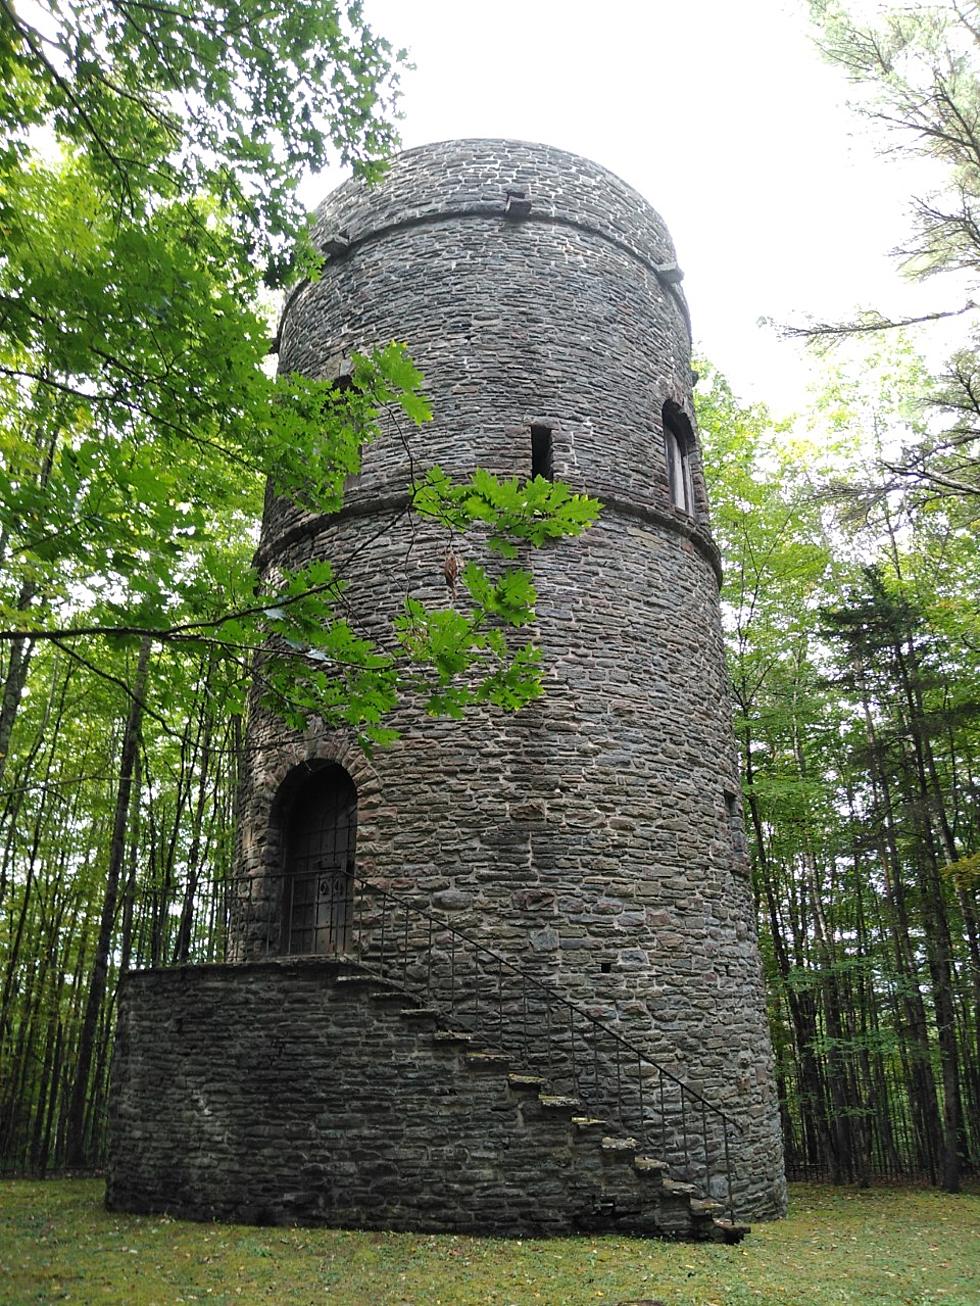 Discover This Beautiful and Historical Trail In Cooperstown Featuring Unique Irish-style Tower